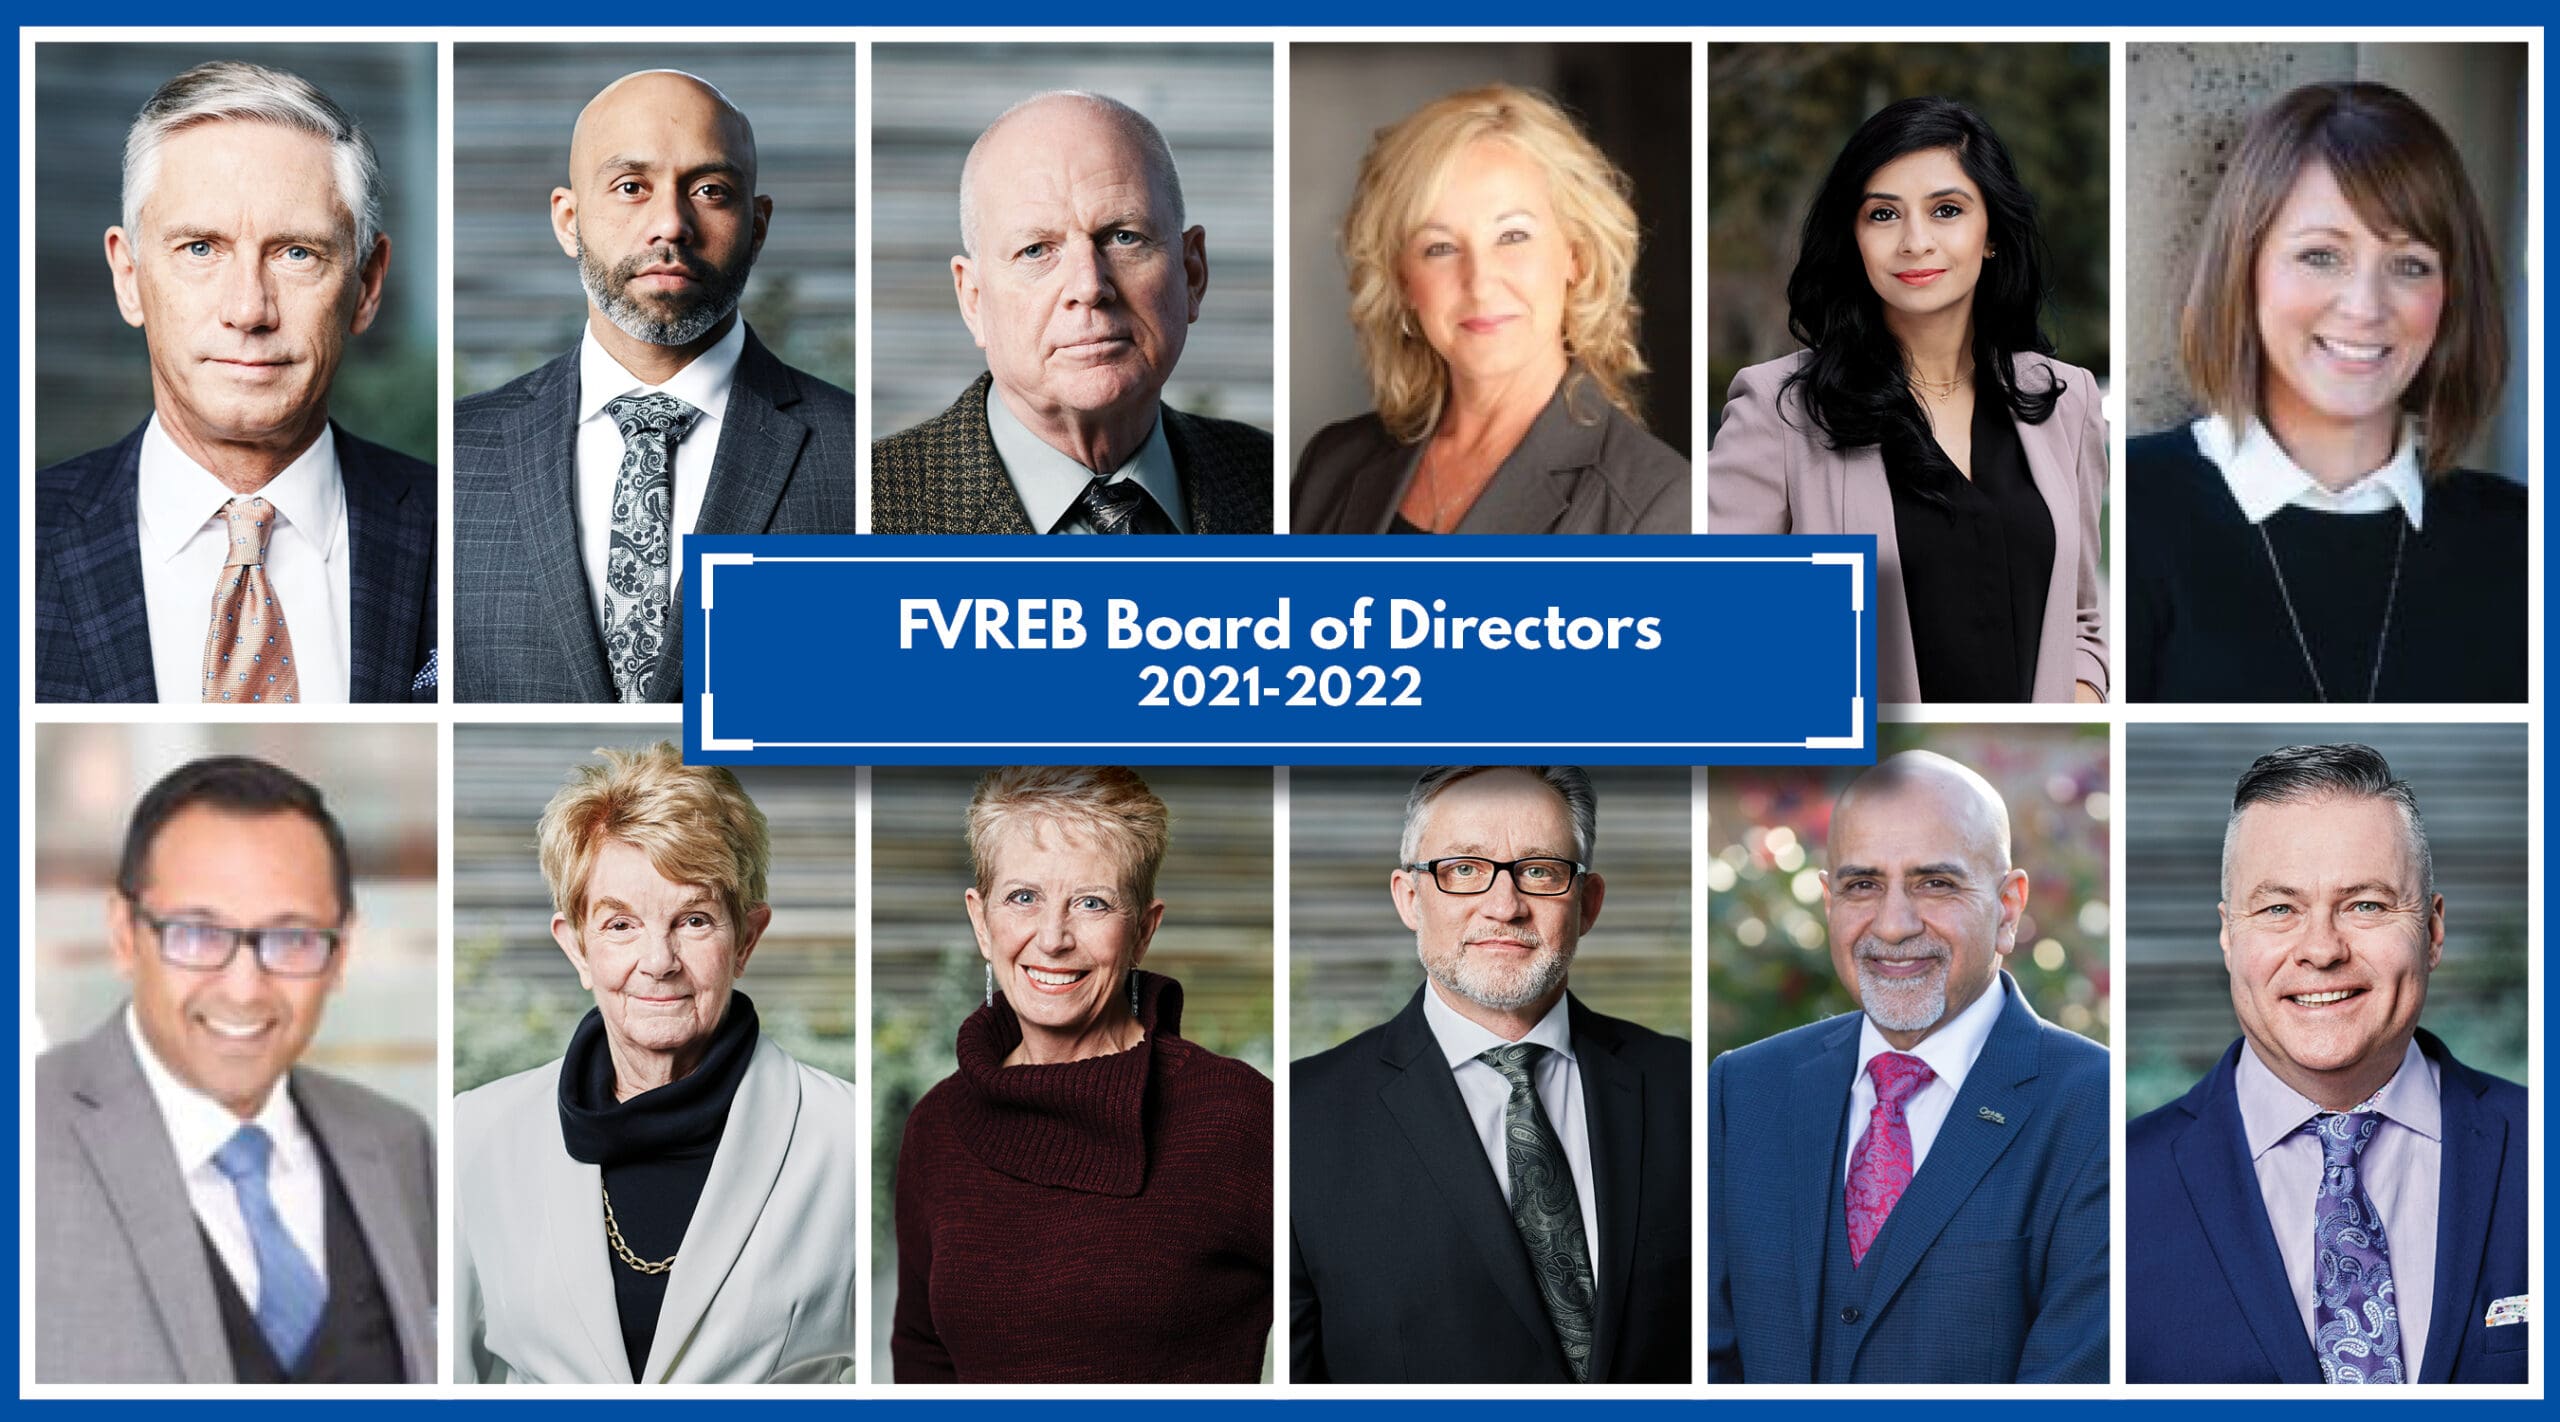 FVREB elects 2021/2022 Board Of Directors